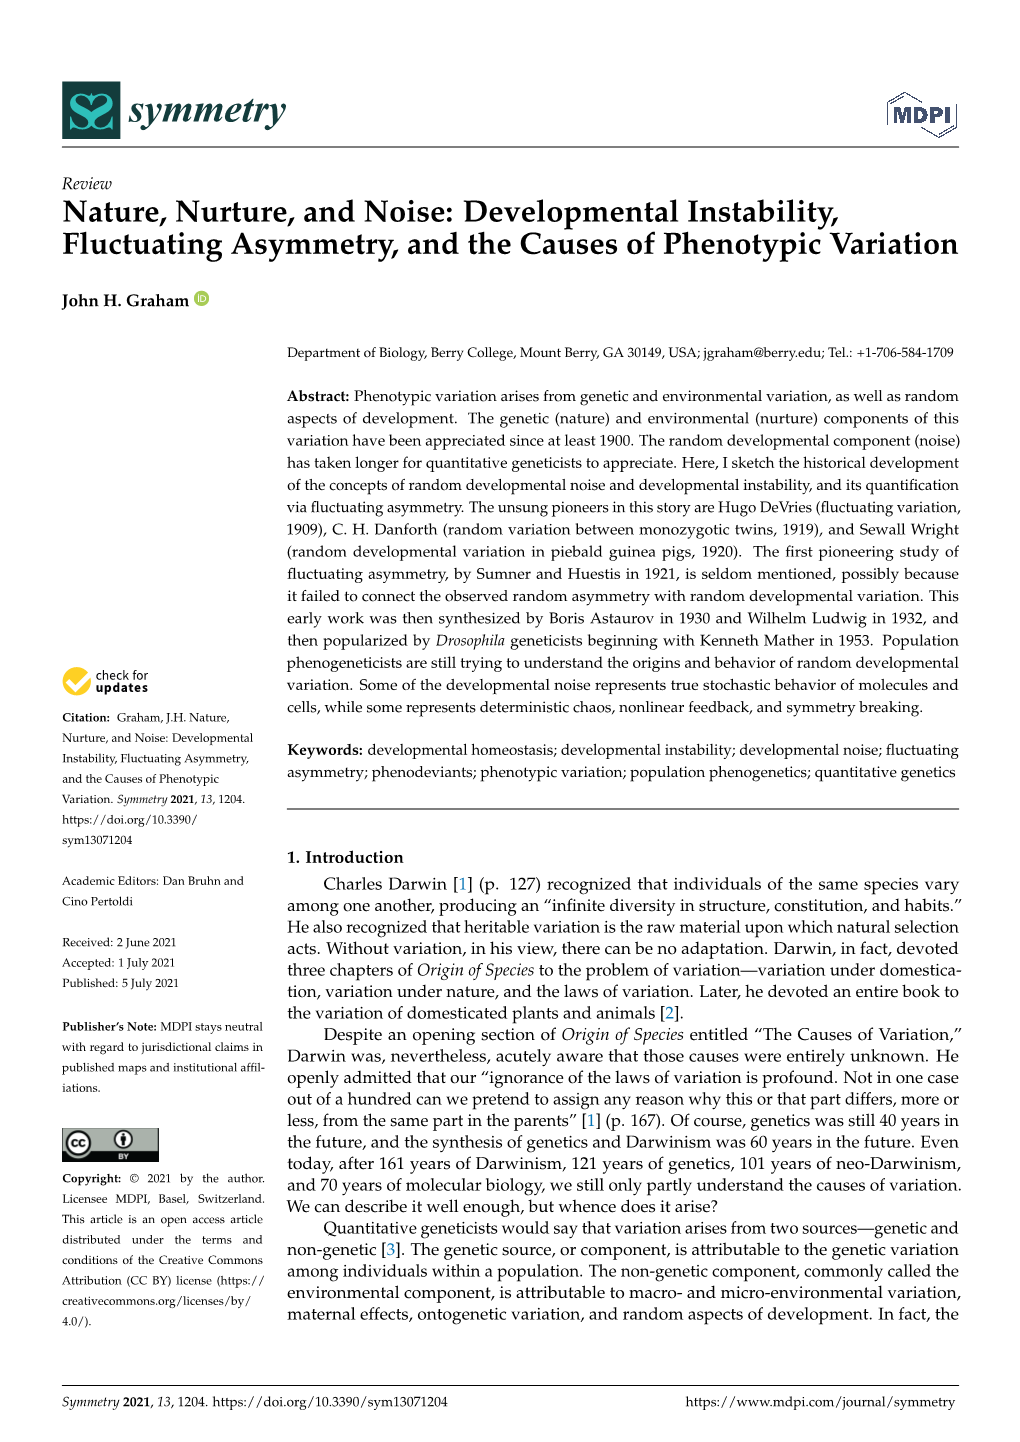 Developmental Instability, Fluctuating Asymmetry, and the Causes of Phenotypic Variation